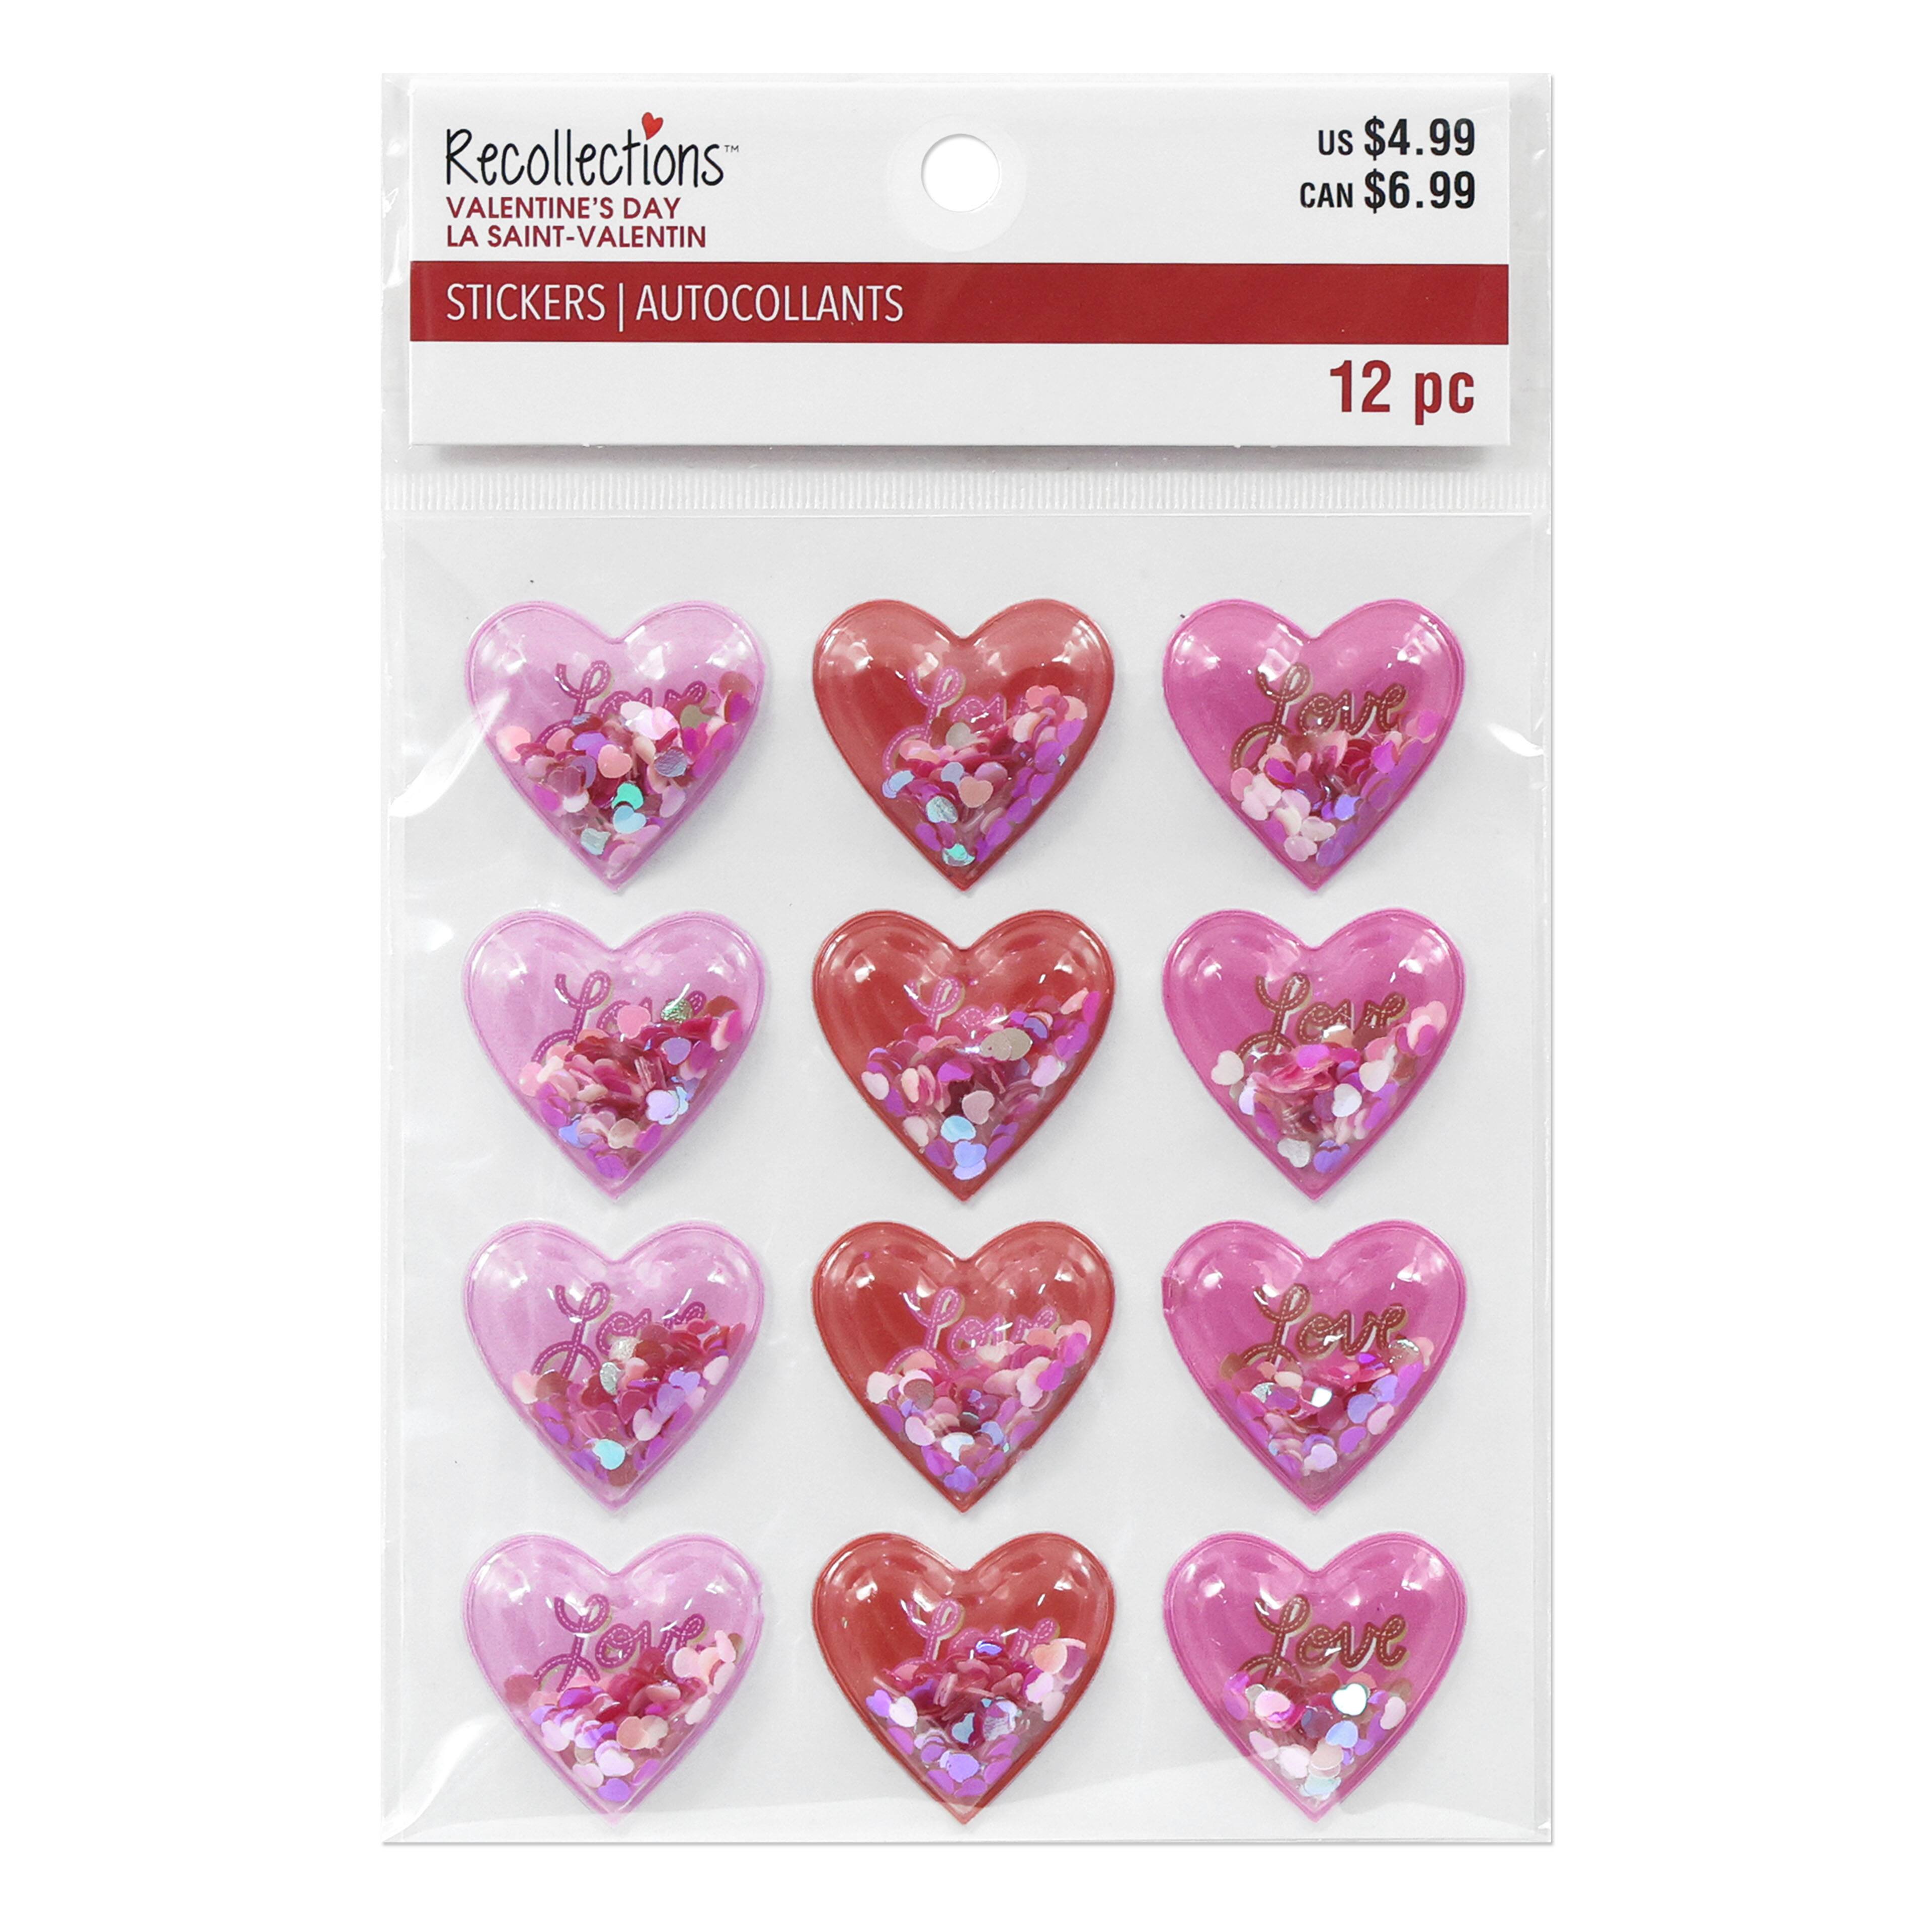 Cute Valentine's Day Stamp and Die Sets by Recollections - Pick 1 of 12 NEW!